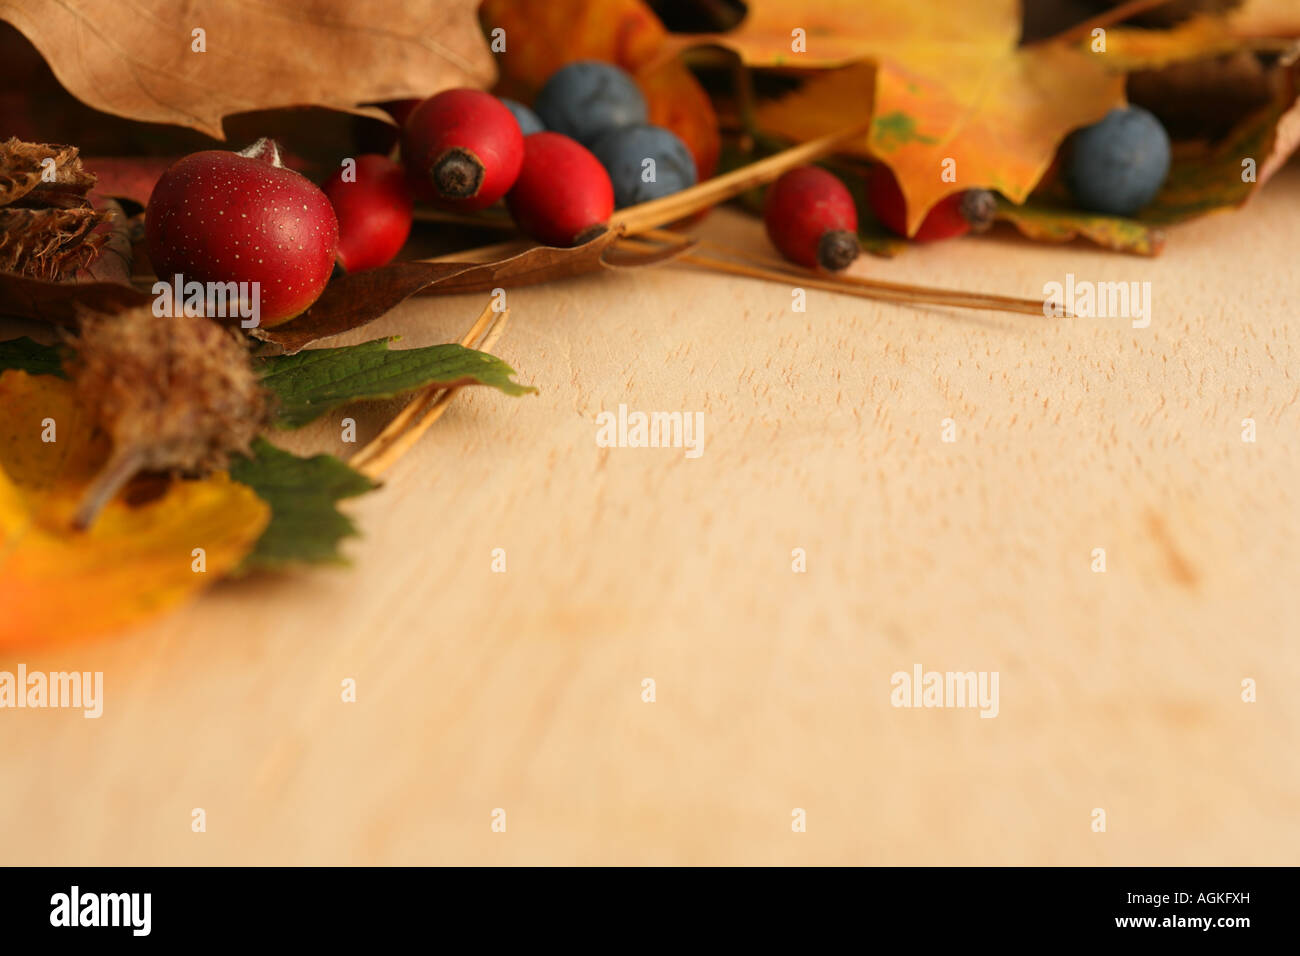 Autumn berries and leaves natures autumn harvest natural food ingredients Stock Photo